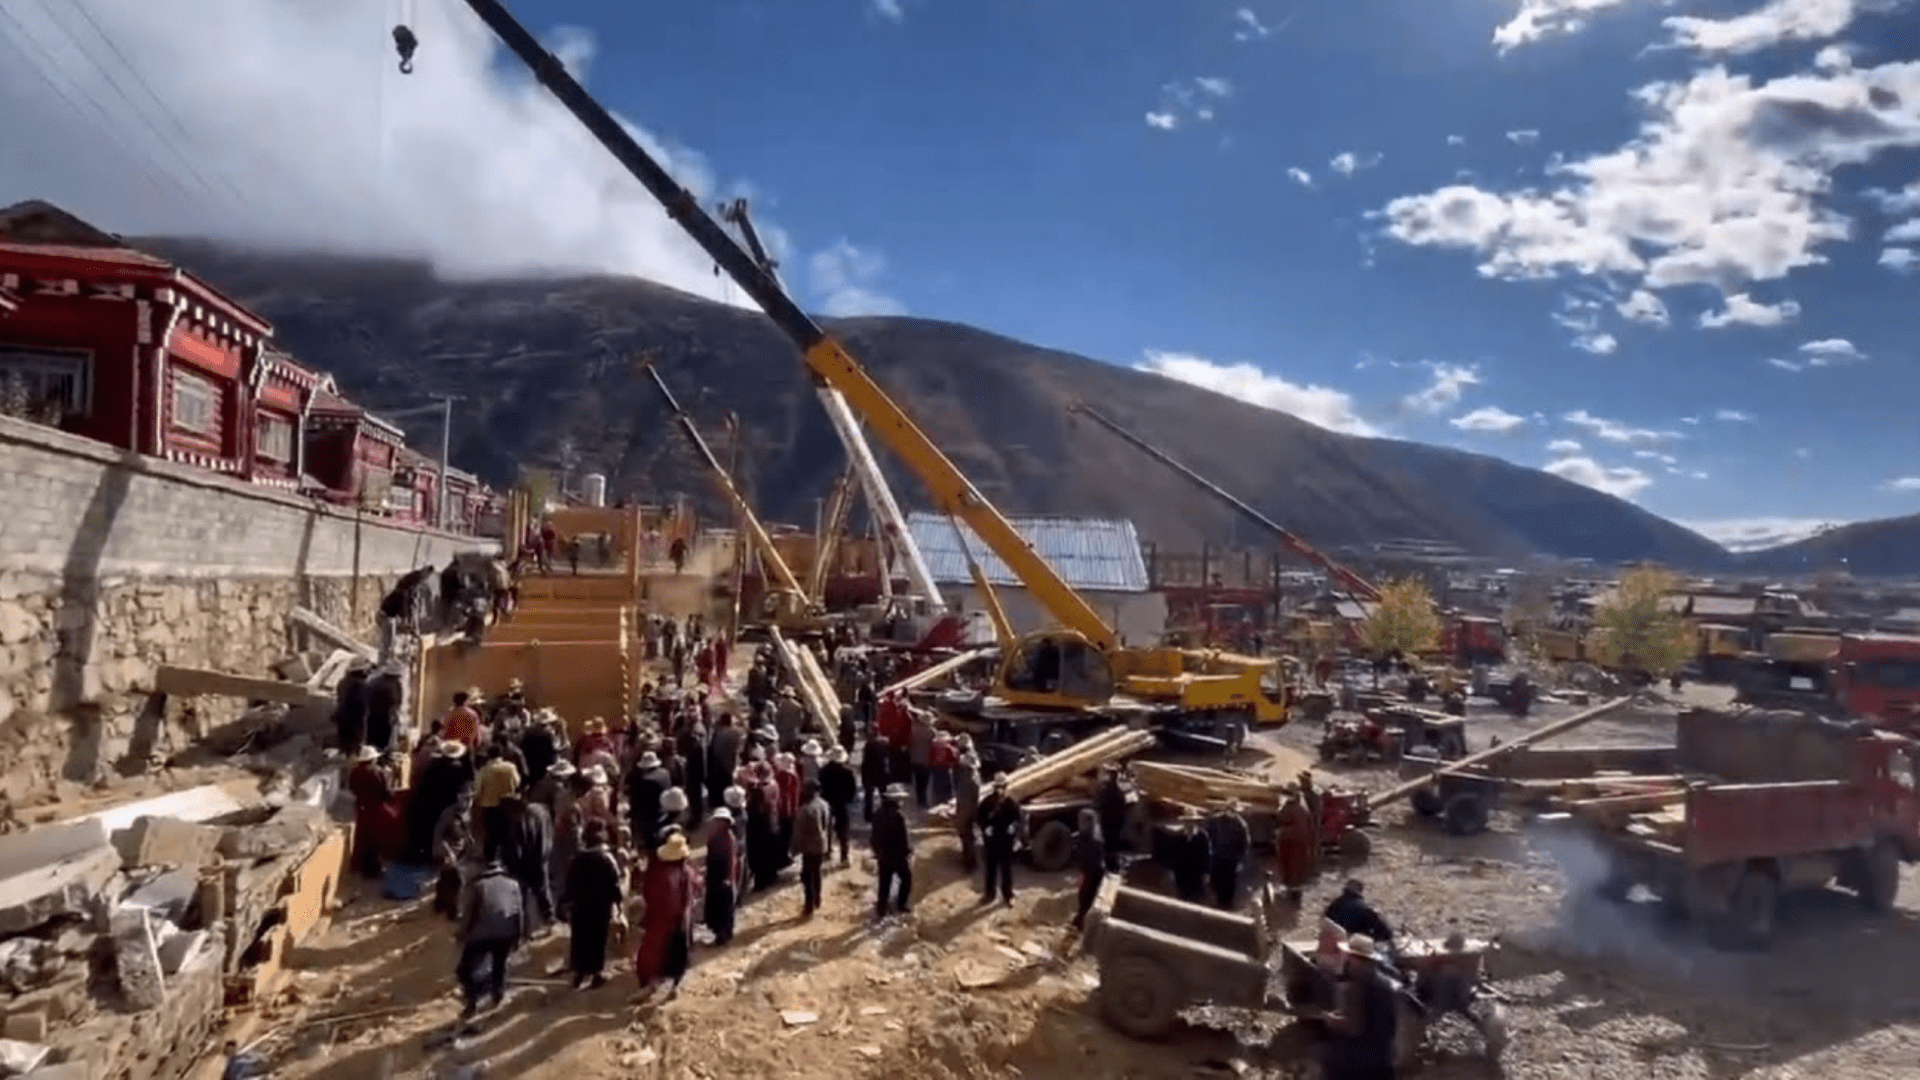 Tibetans have been forced to demolish the school themselves, otherwise the Chinese state will step in and seize the land.